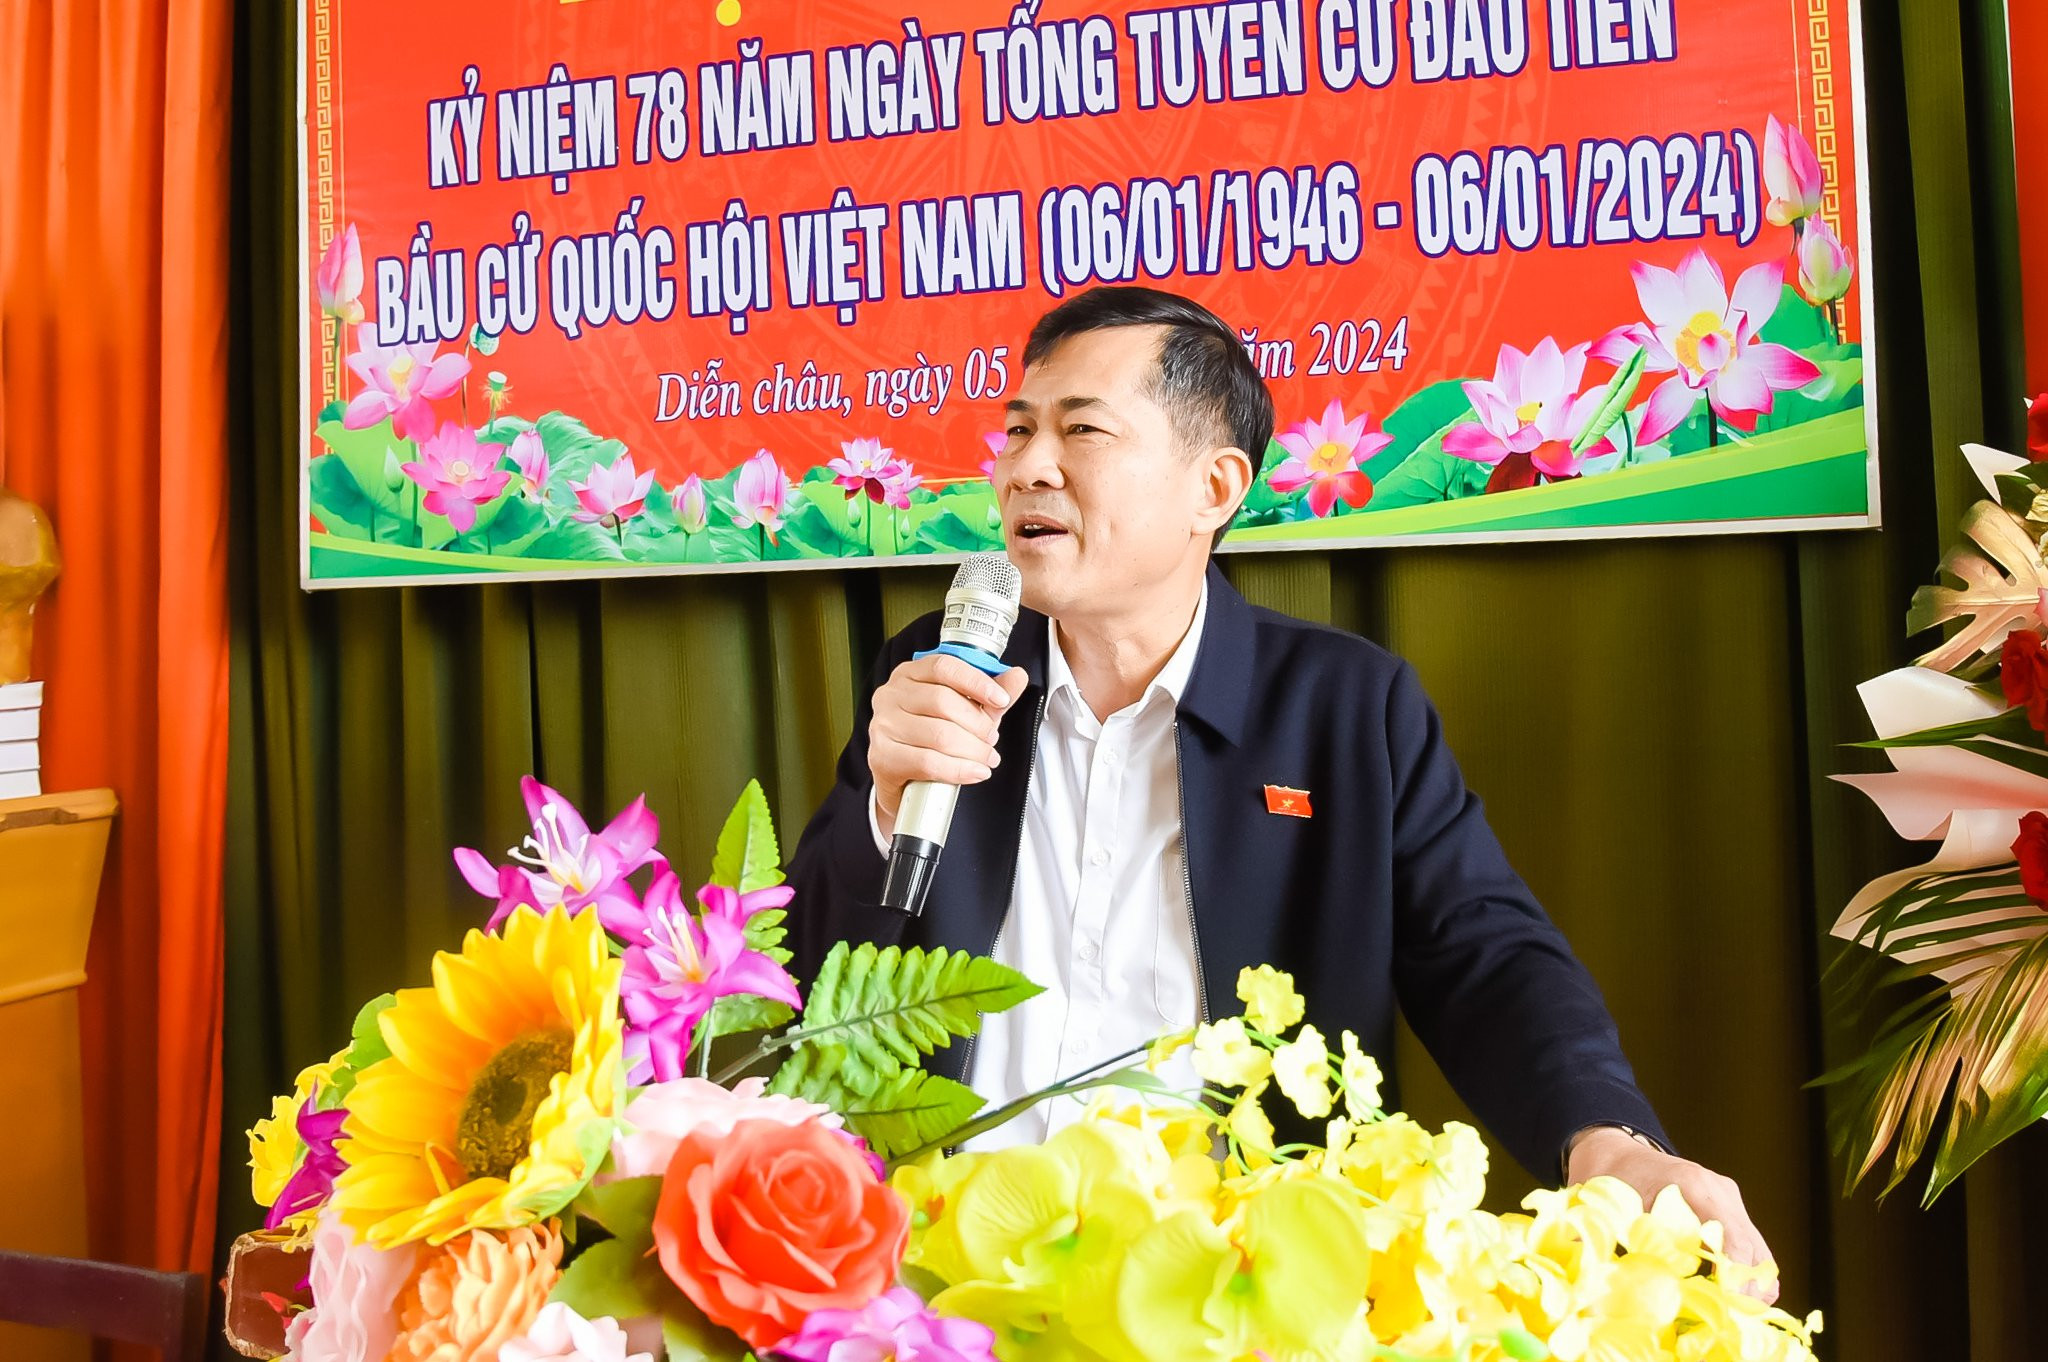 bna-thay-thanh-anh-thanh-le-6329.jpg